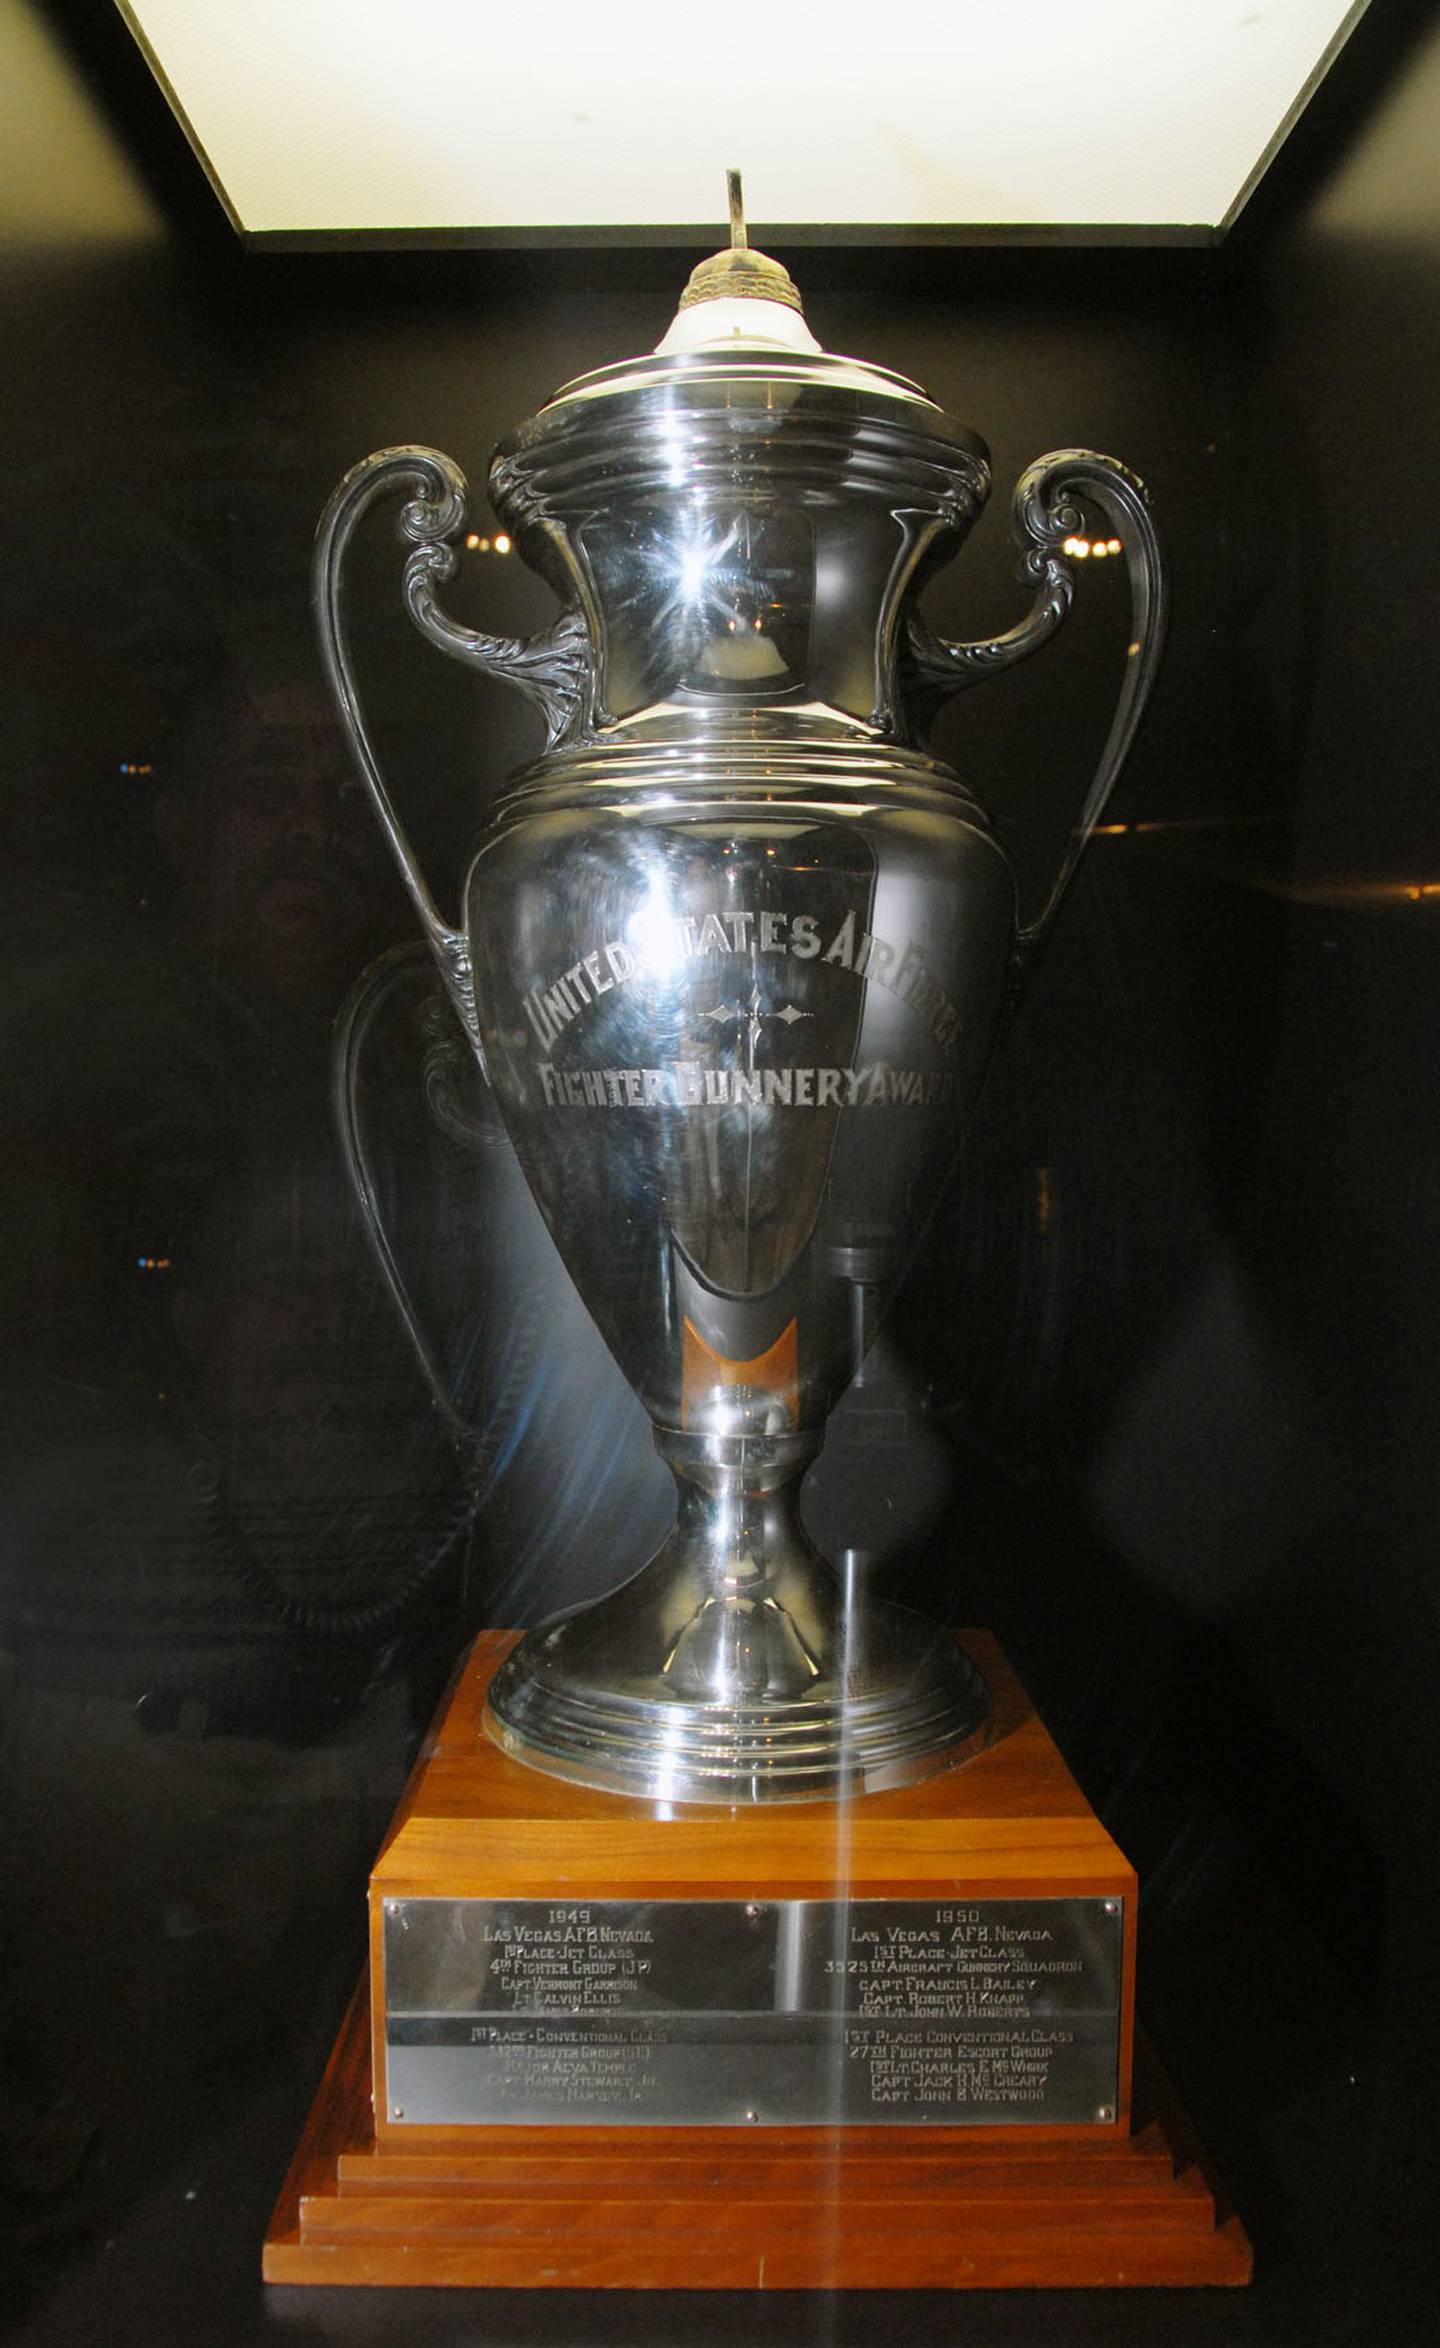 USAF Fighter Gunnery Competition Trophy on display in the World War II Gallery at the National Museum of the U.S. Air Force. (U.S. Air Force photo)